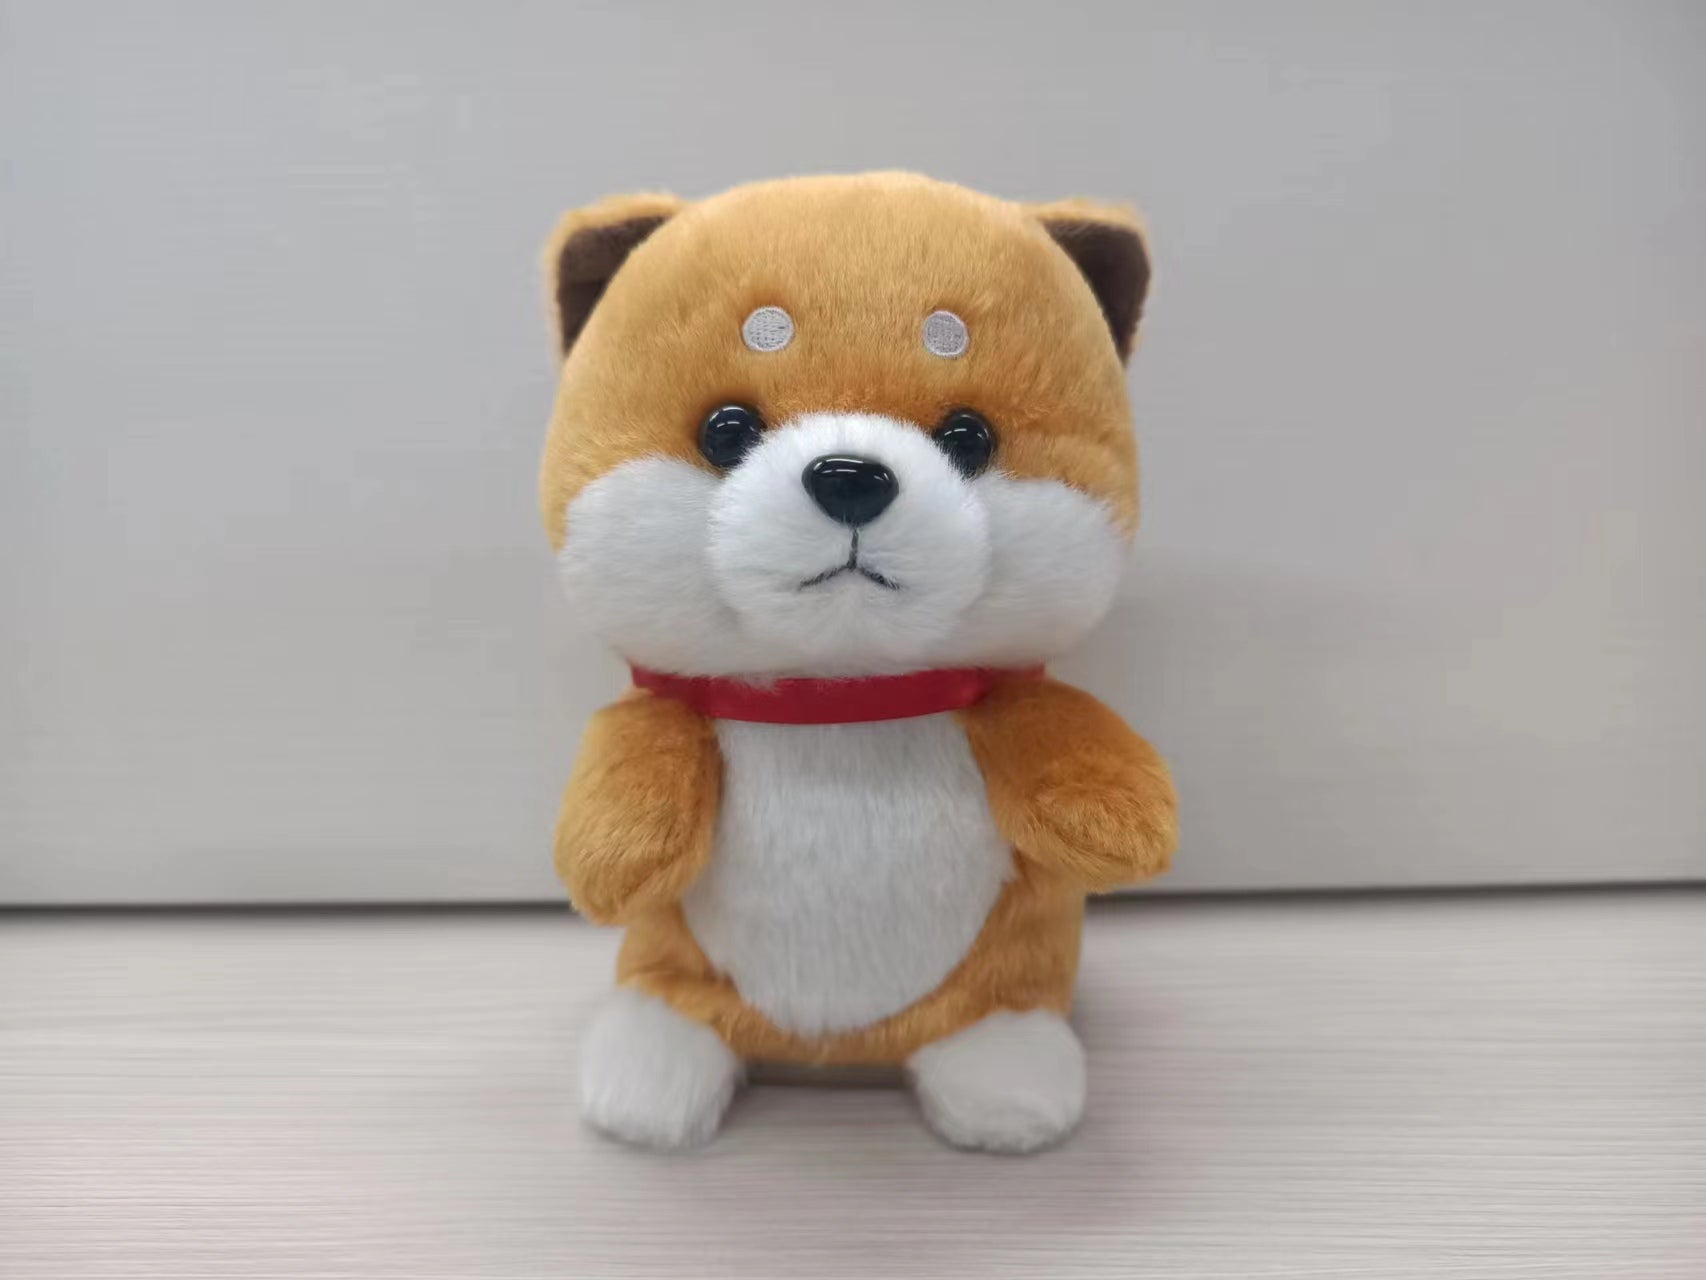 MINISO Electric Talking Plush Toy(Shiba Inu) – Miniso Philippines Official